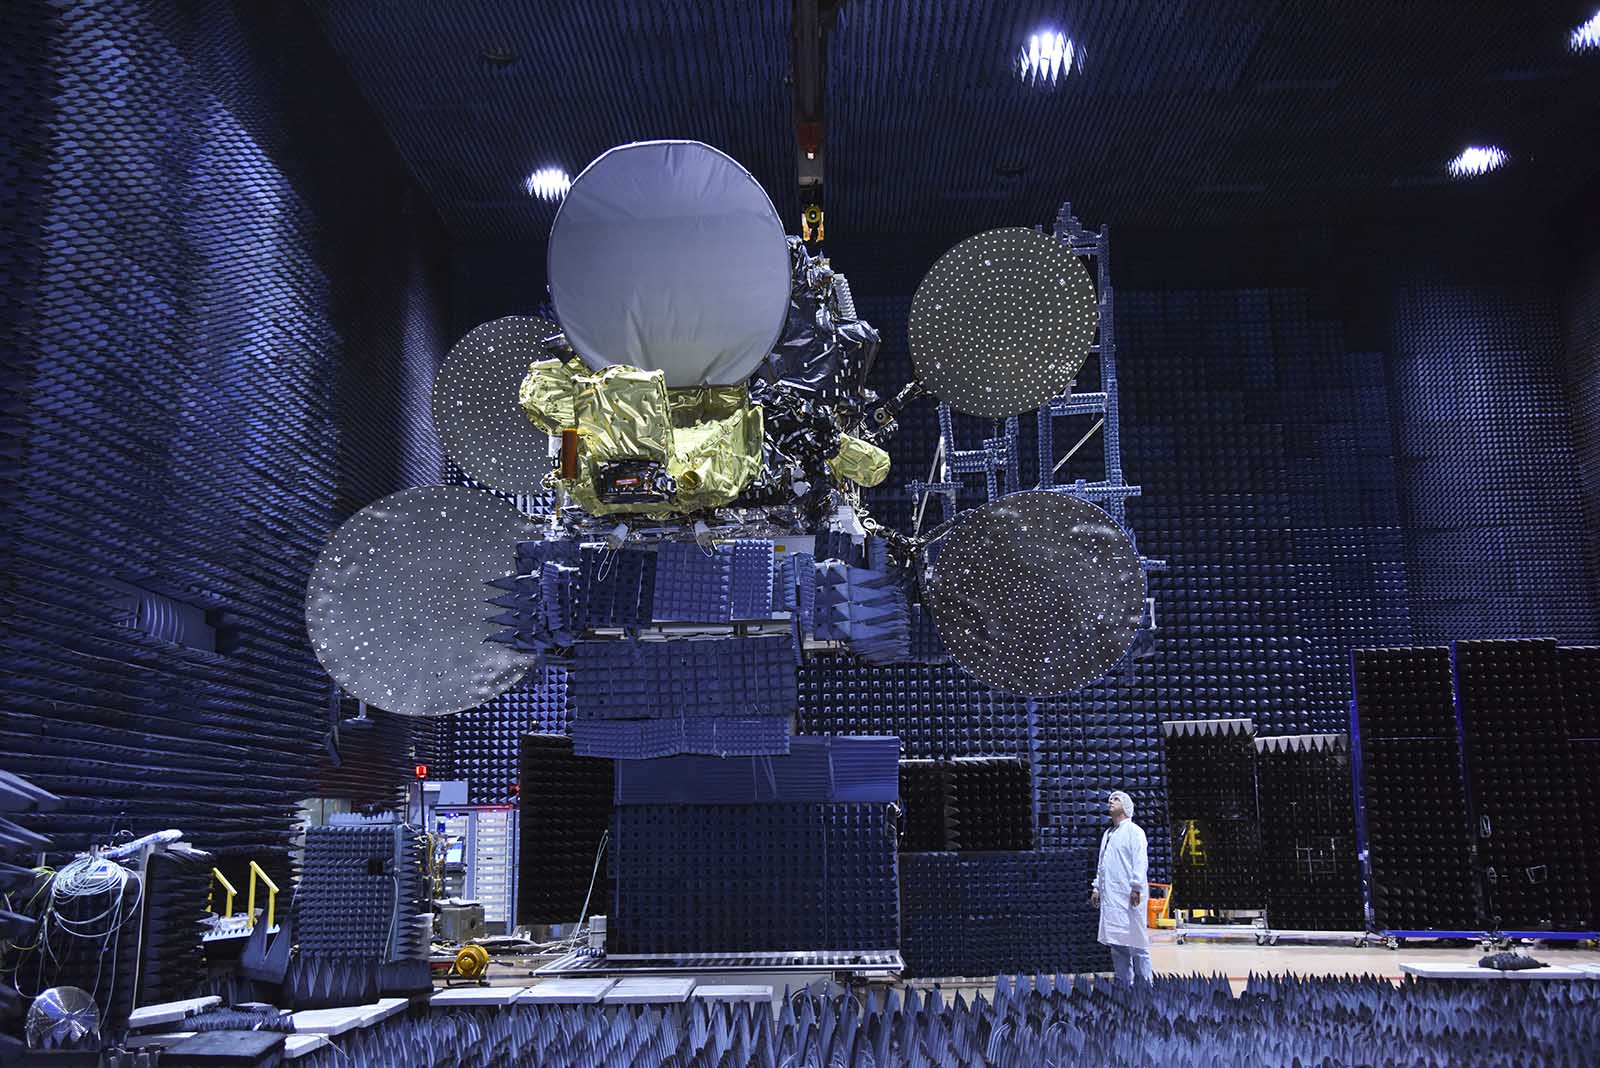 EUTELSAT 65 West A in the compact antenna test range at SSL